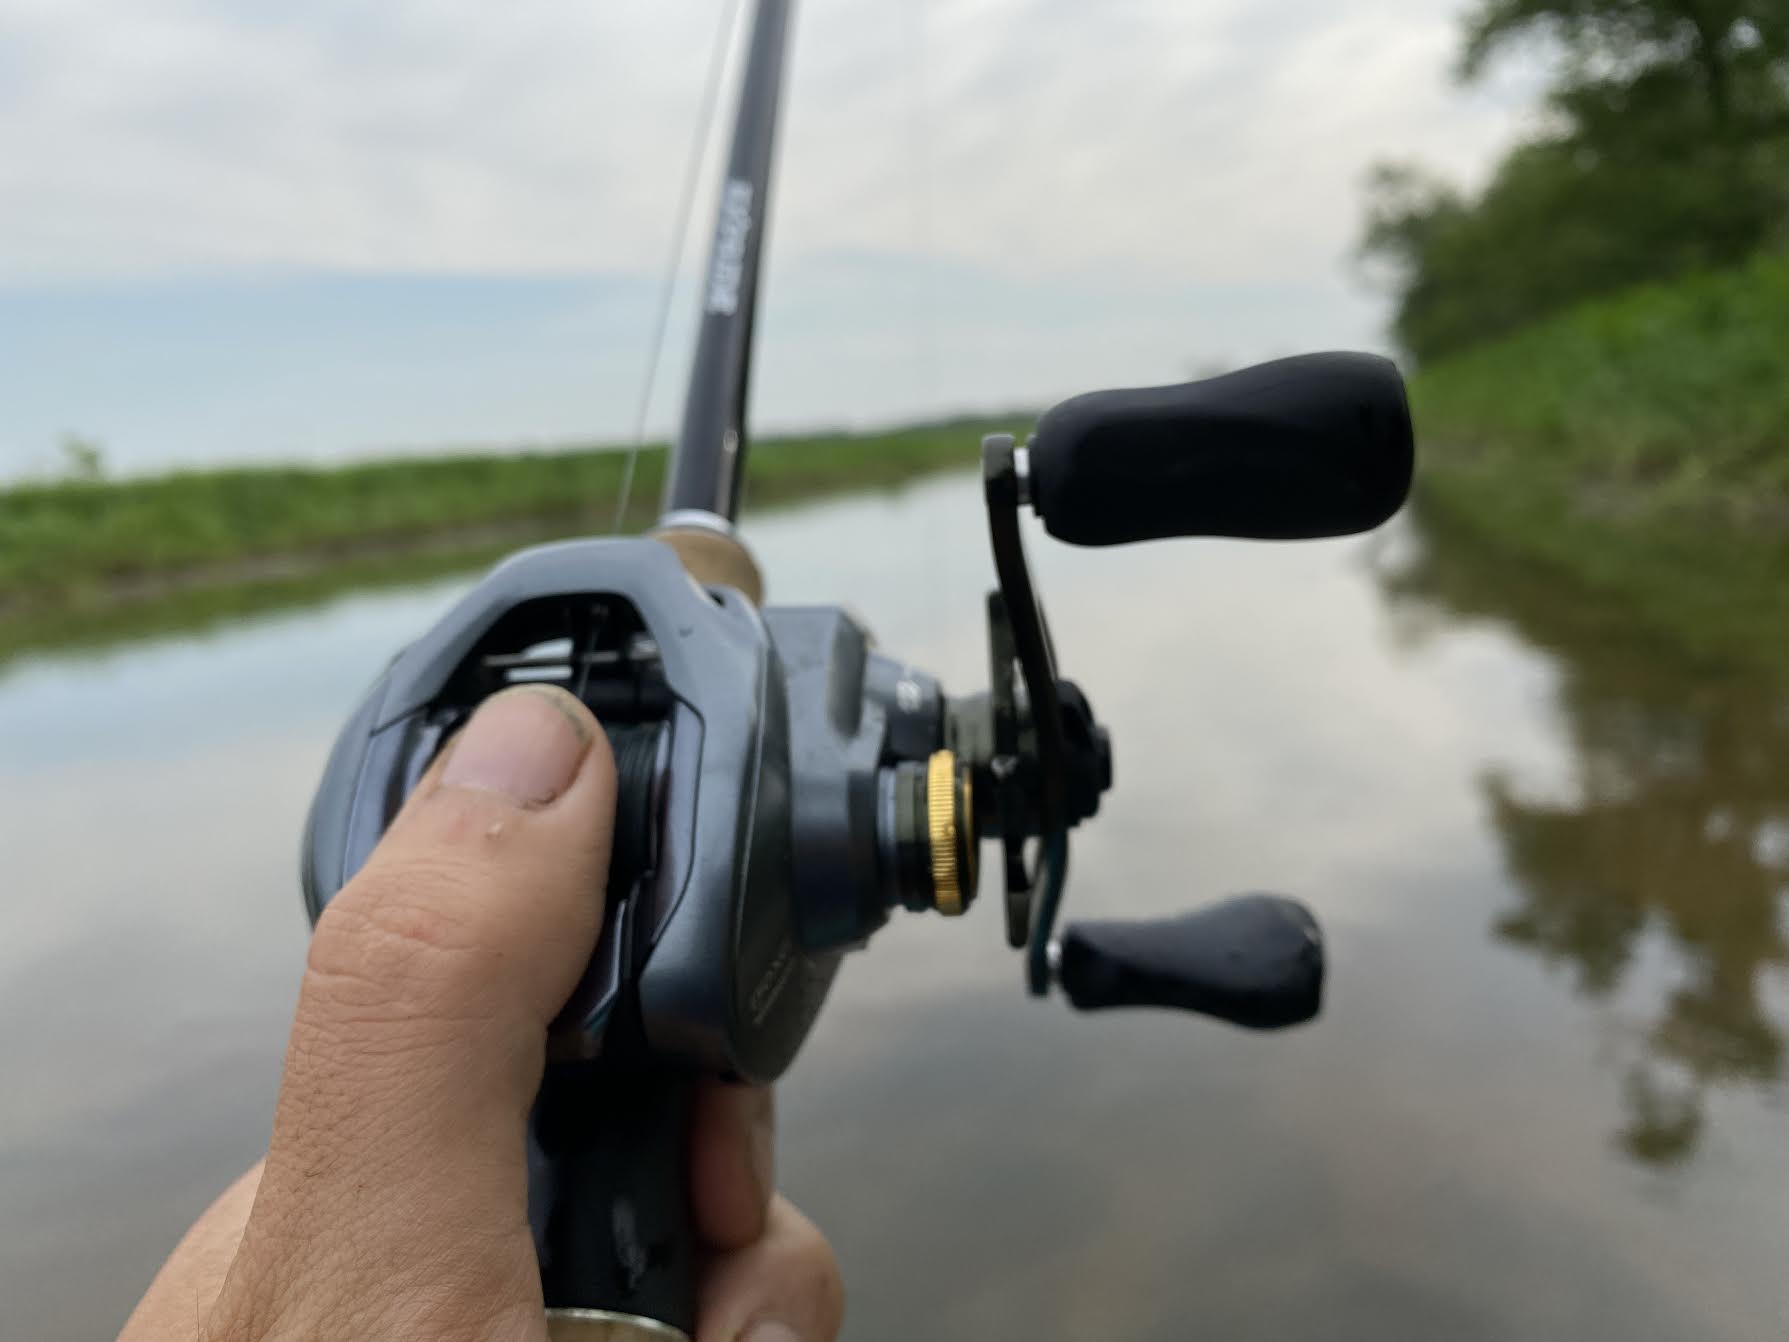 An angler's thumb on a baitcasting reel over a body of water